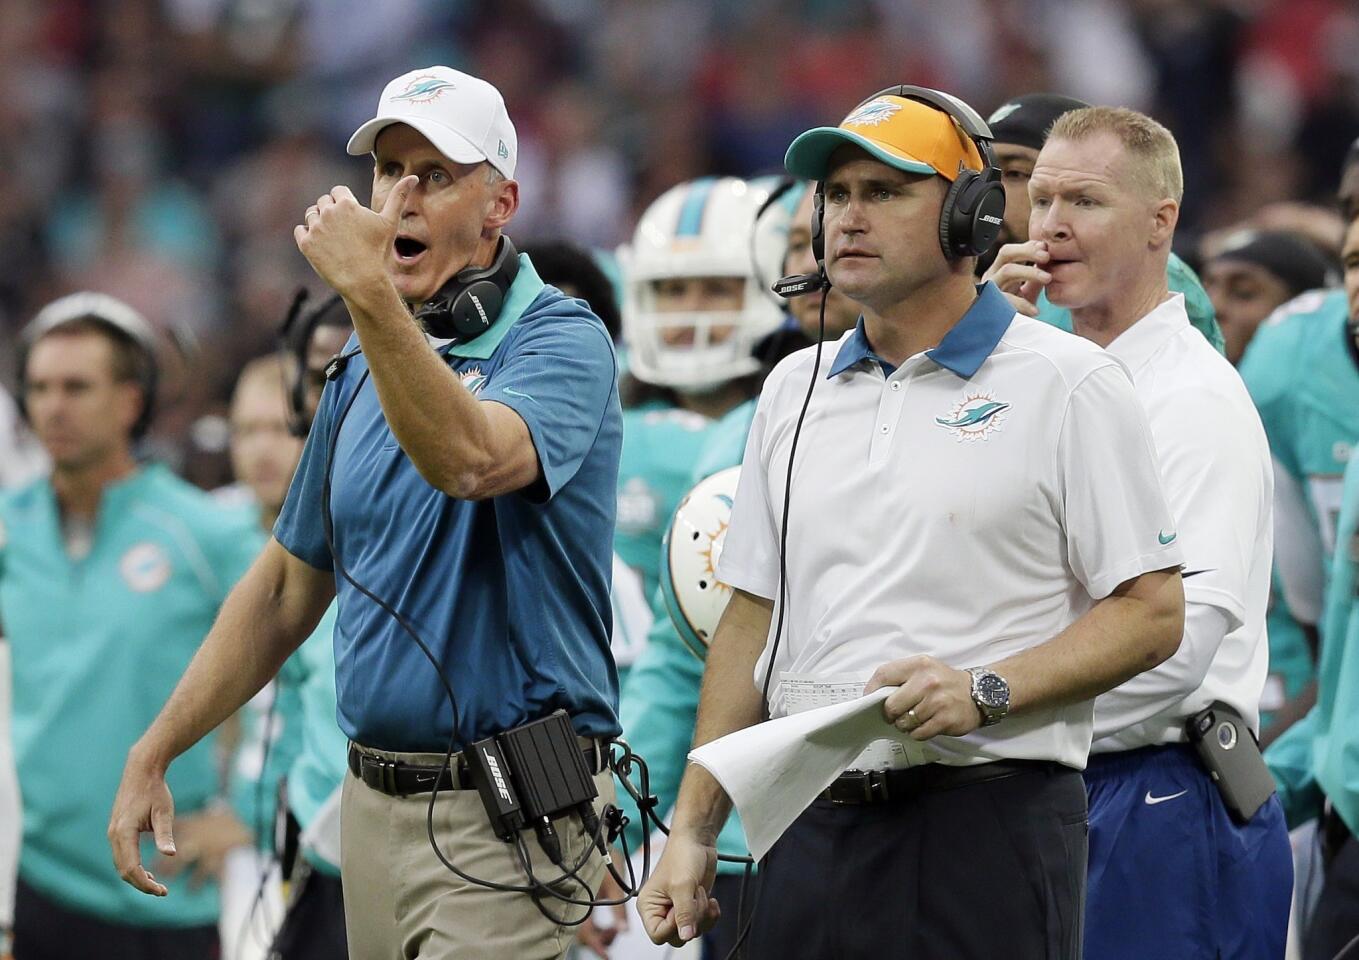 Miami Dolphins head coach Joe Philbin, left, gestures during the NFL football game between the New York Jets and the Miami Dolphins and at Wembley stadium in London, Sunday, Oct. 4, 2015. (AP Photo/Tim Ireland) ORG XMIT: NYOTK